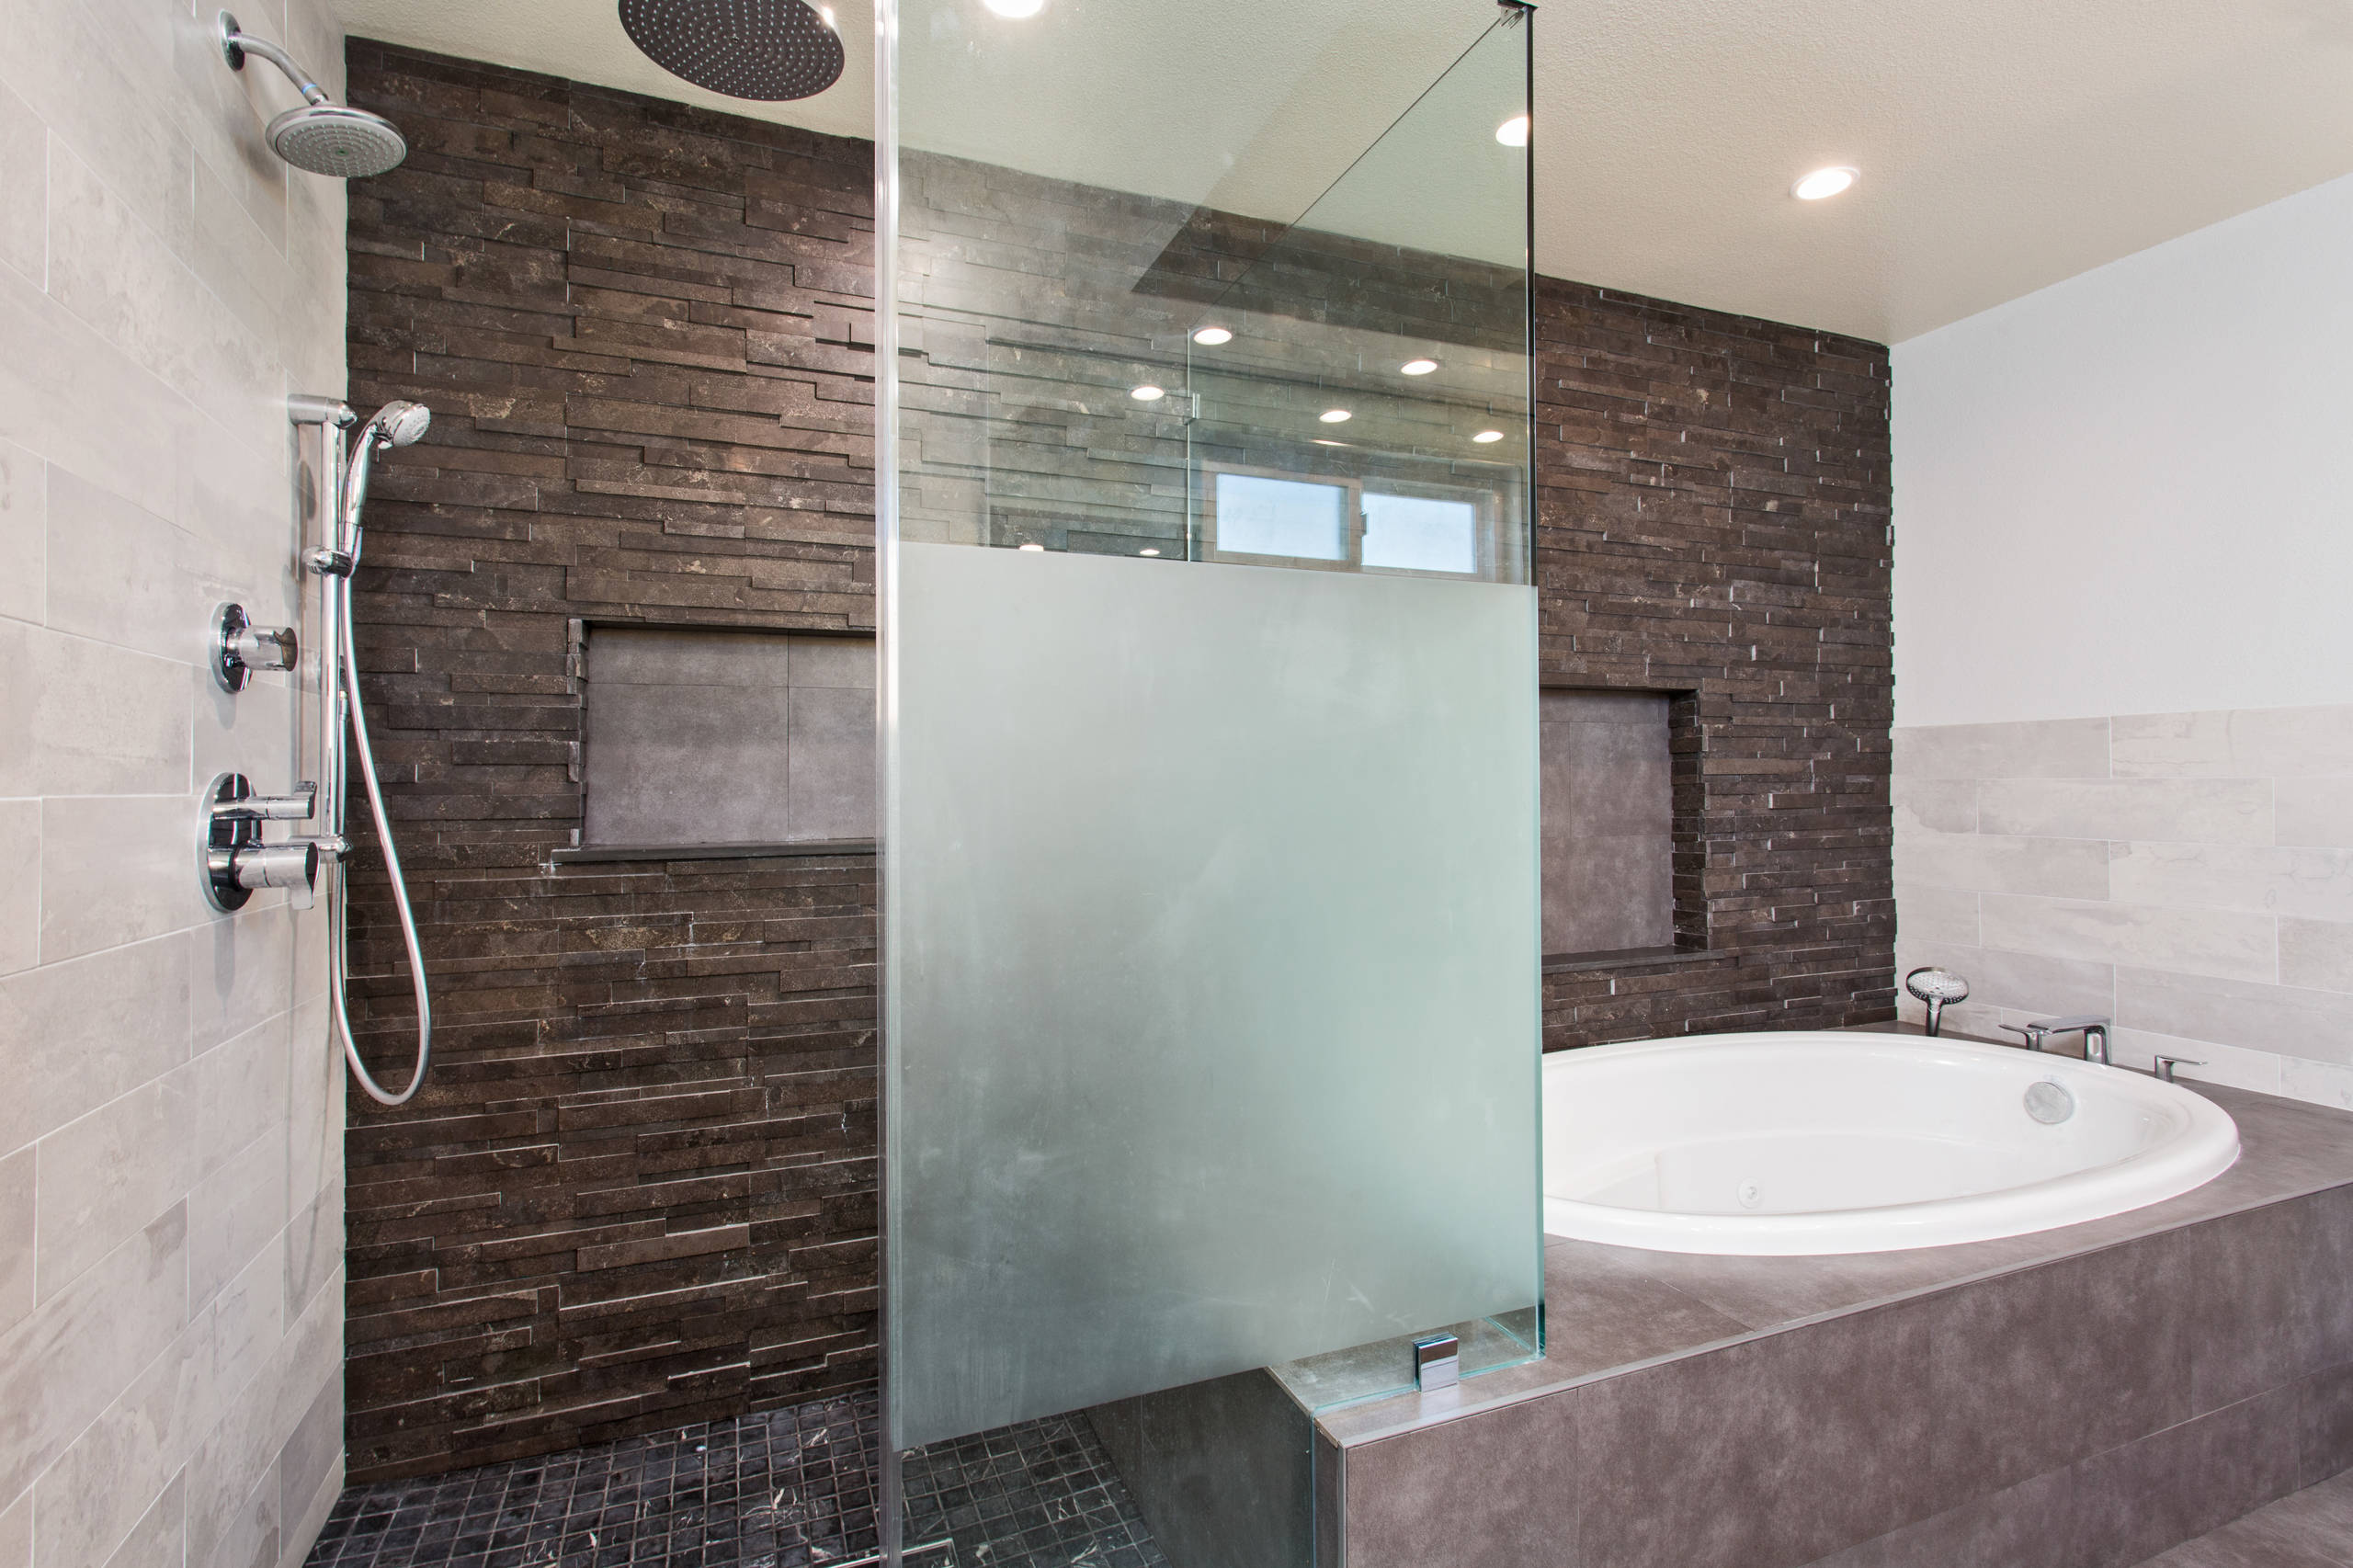 75 Beautiful Bathroom with a Hot Tub Pictures & Ideas - January, 2022 |  Houzz